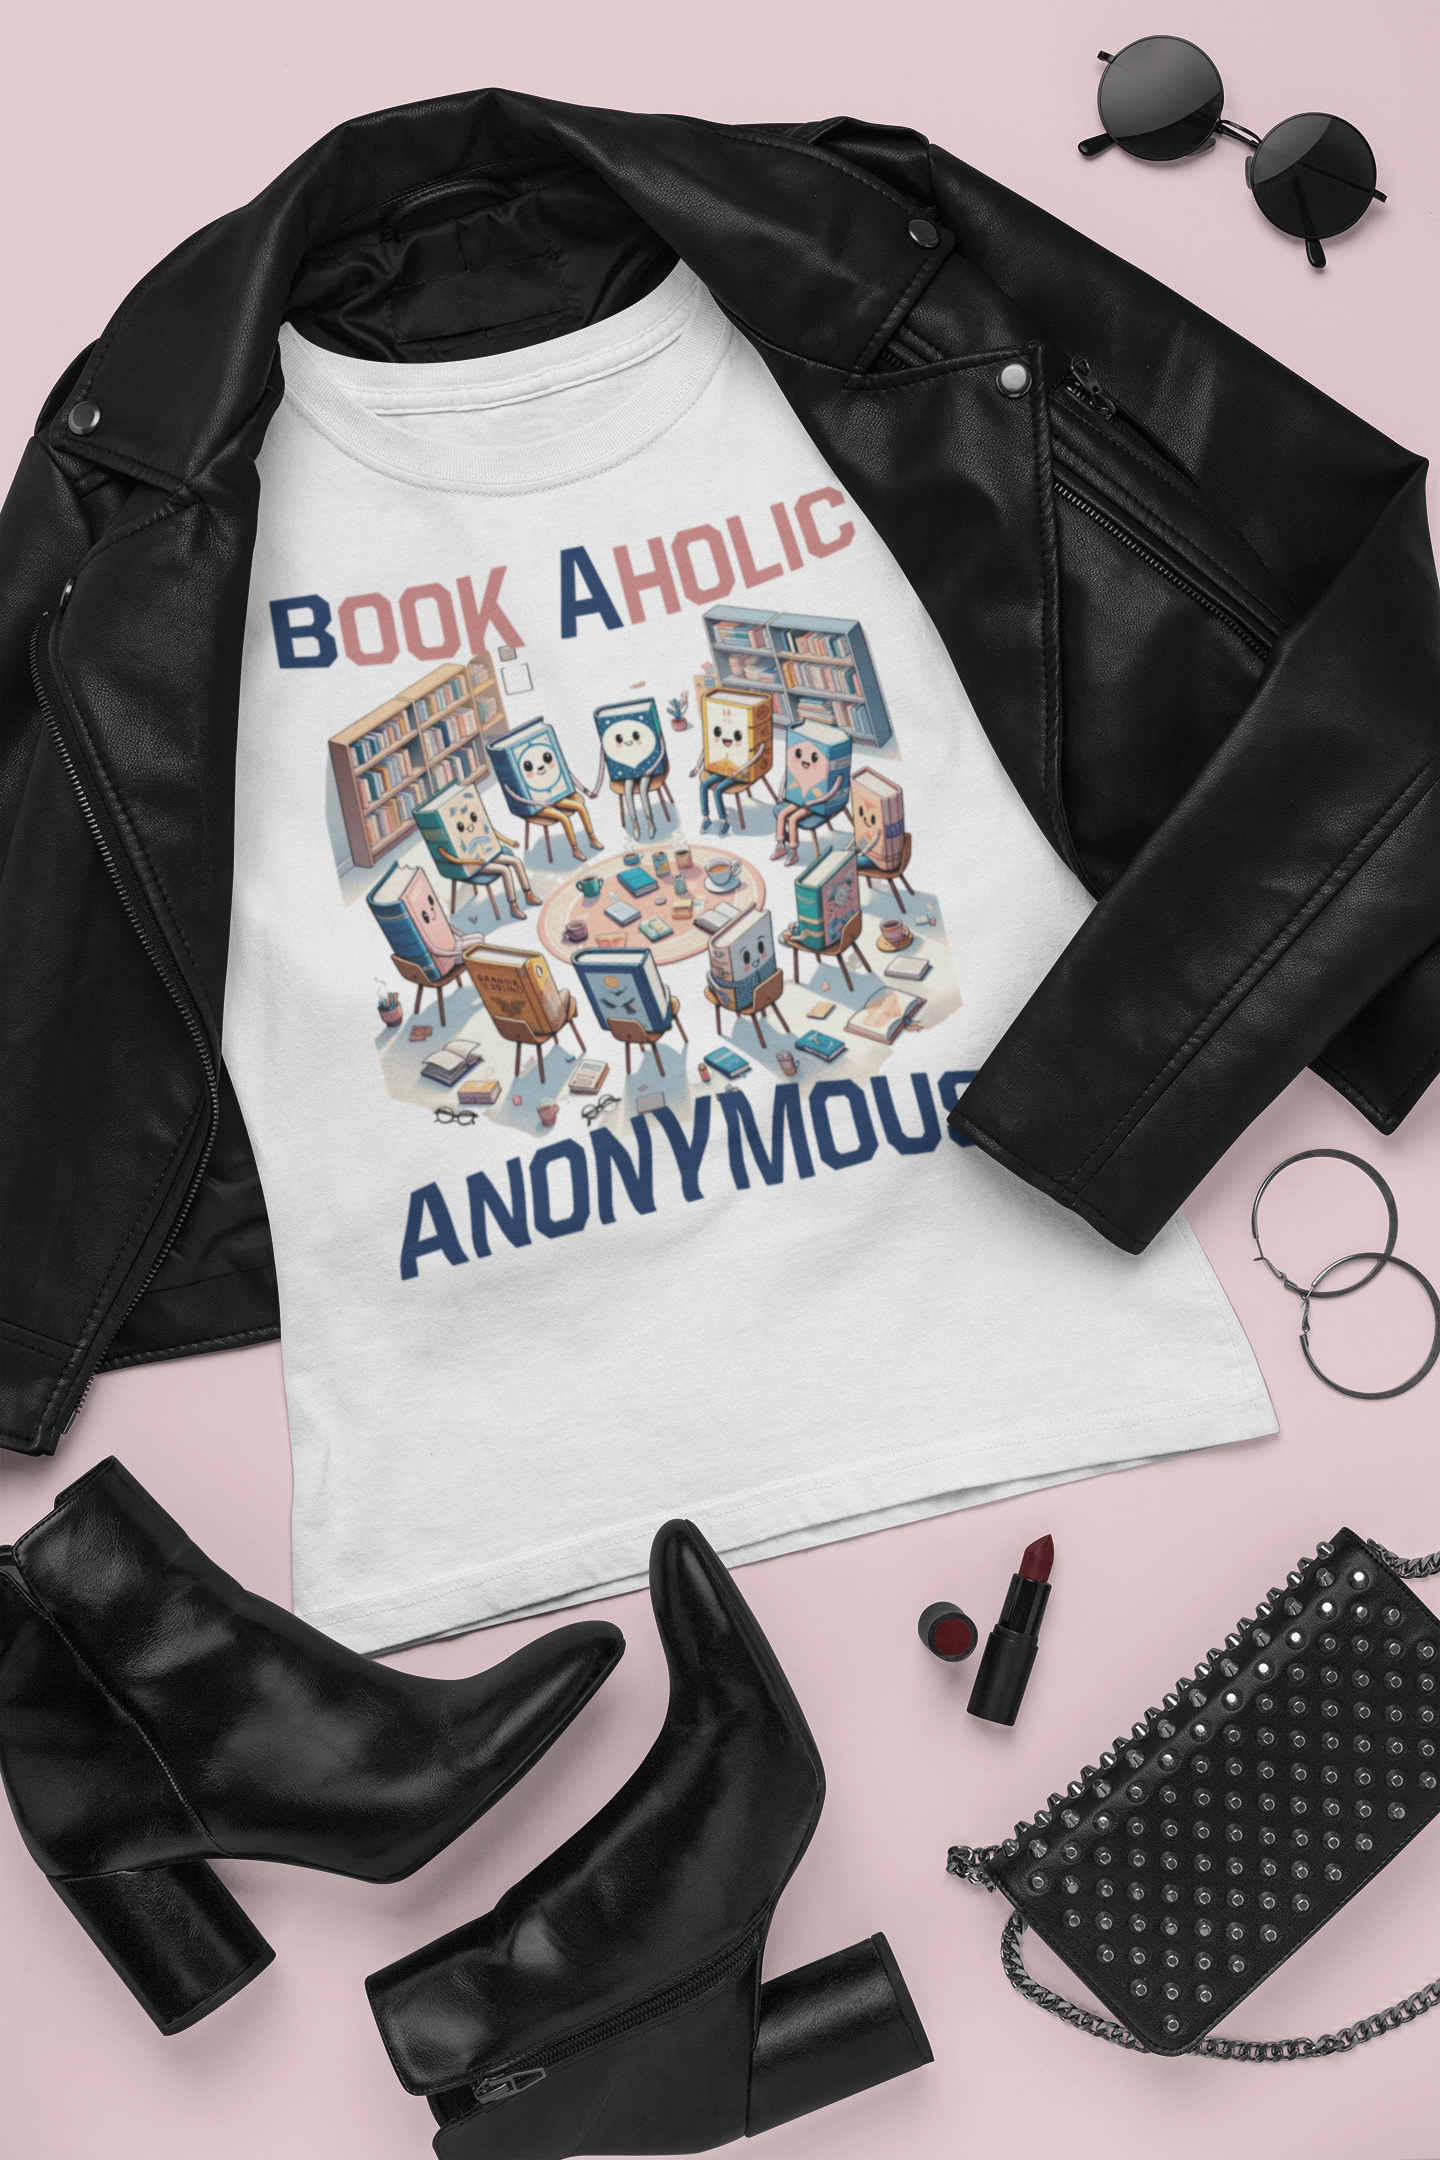 Book Aholic Anonymous